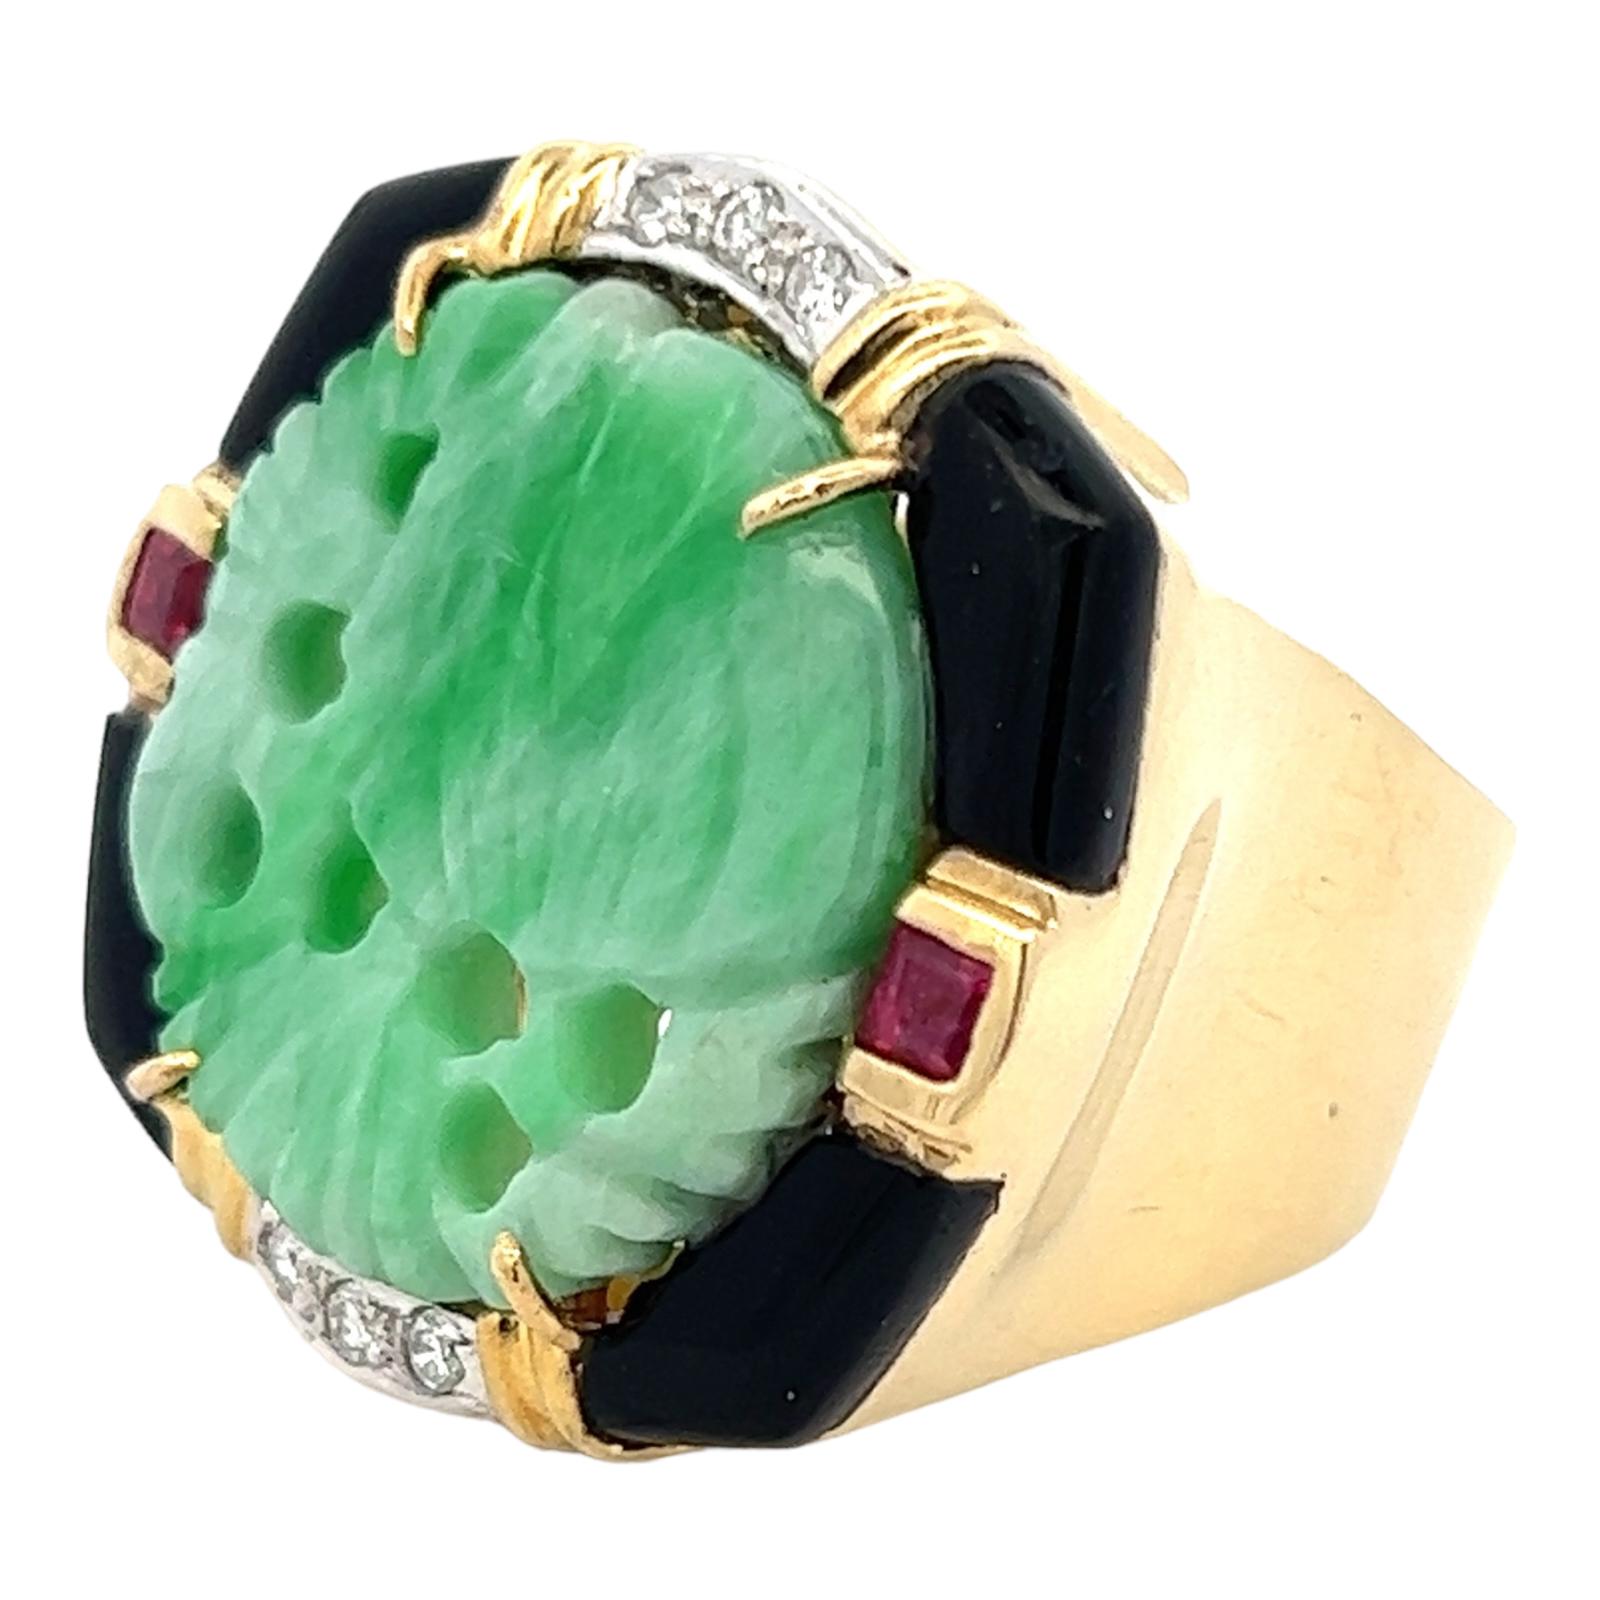 Beautiful carved jade diamond ring handcrafted in 18 karat yellow gold. The cocktail ring features carved green jade gemstone set in an onyx, diamond and ruby mounting. The 6 round brilliant cut diamonds weigh approximately .12 CTW. The top measures